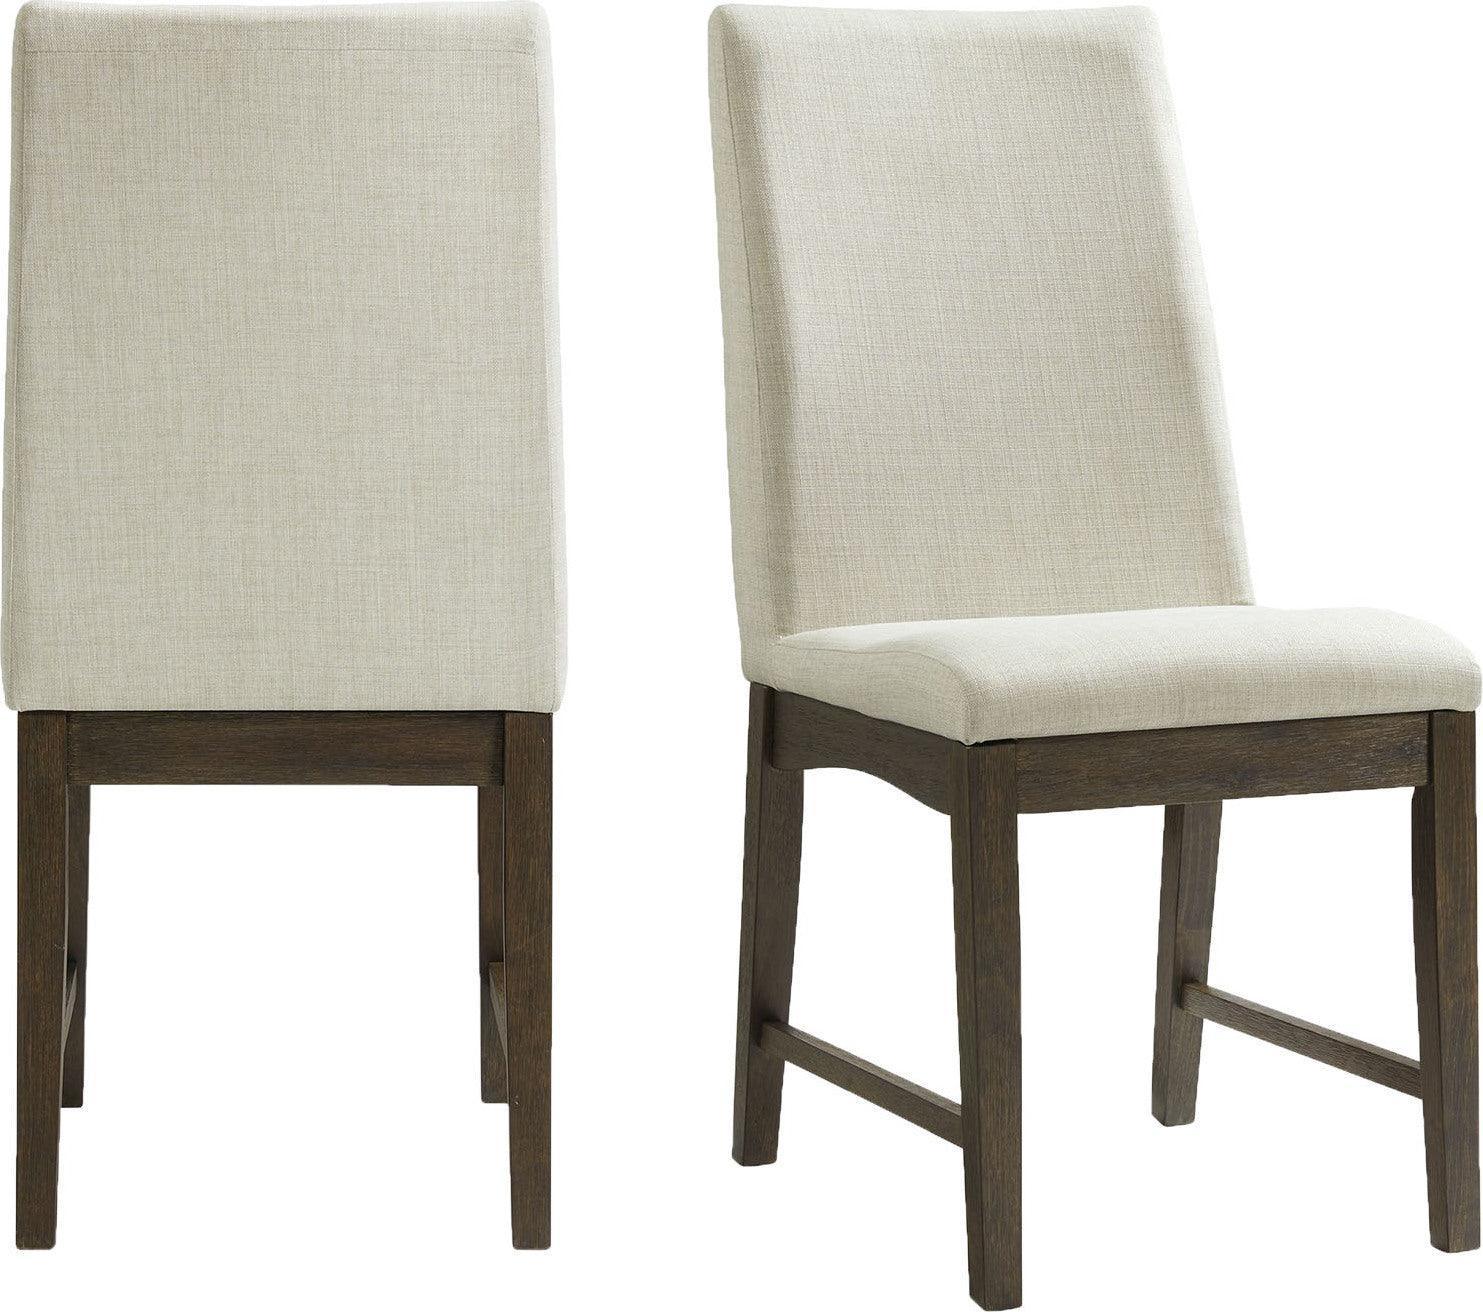 Elements Dining Chairs - Simms Standard Height Side Chair Set in Walnut (Set of 2)